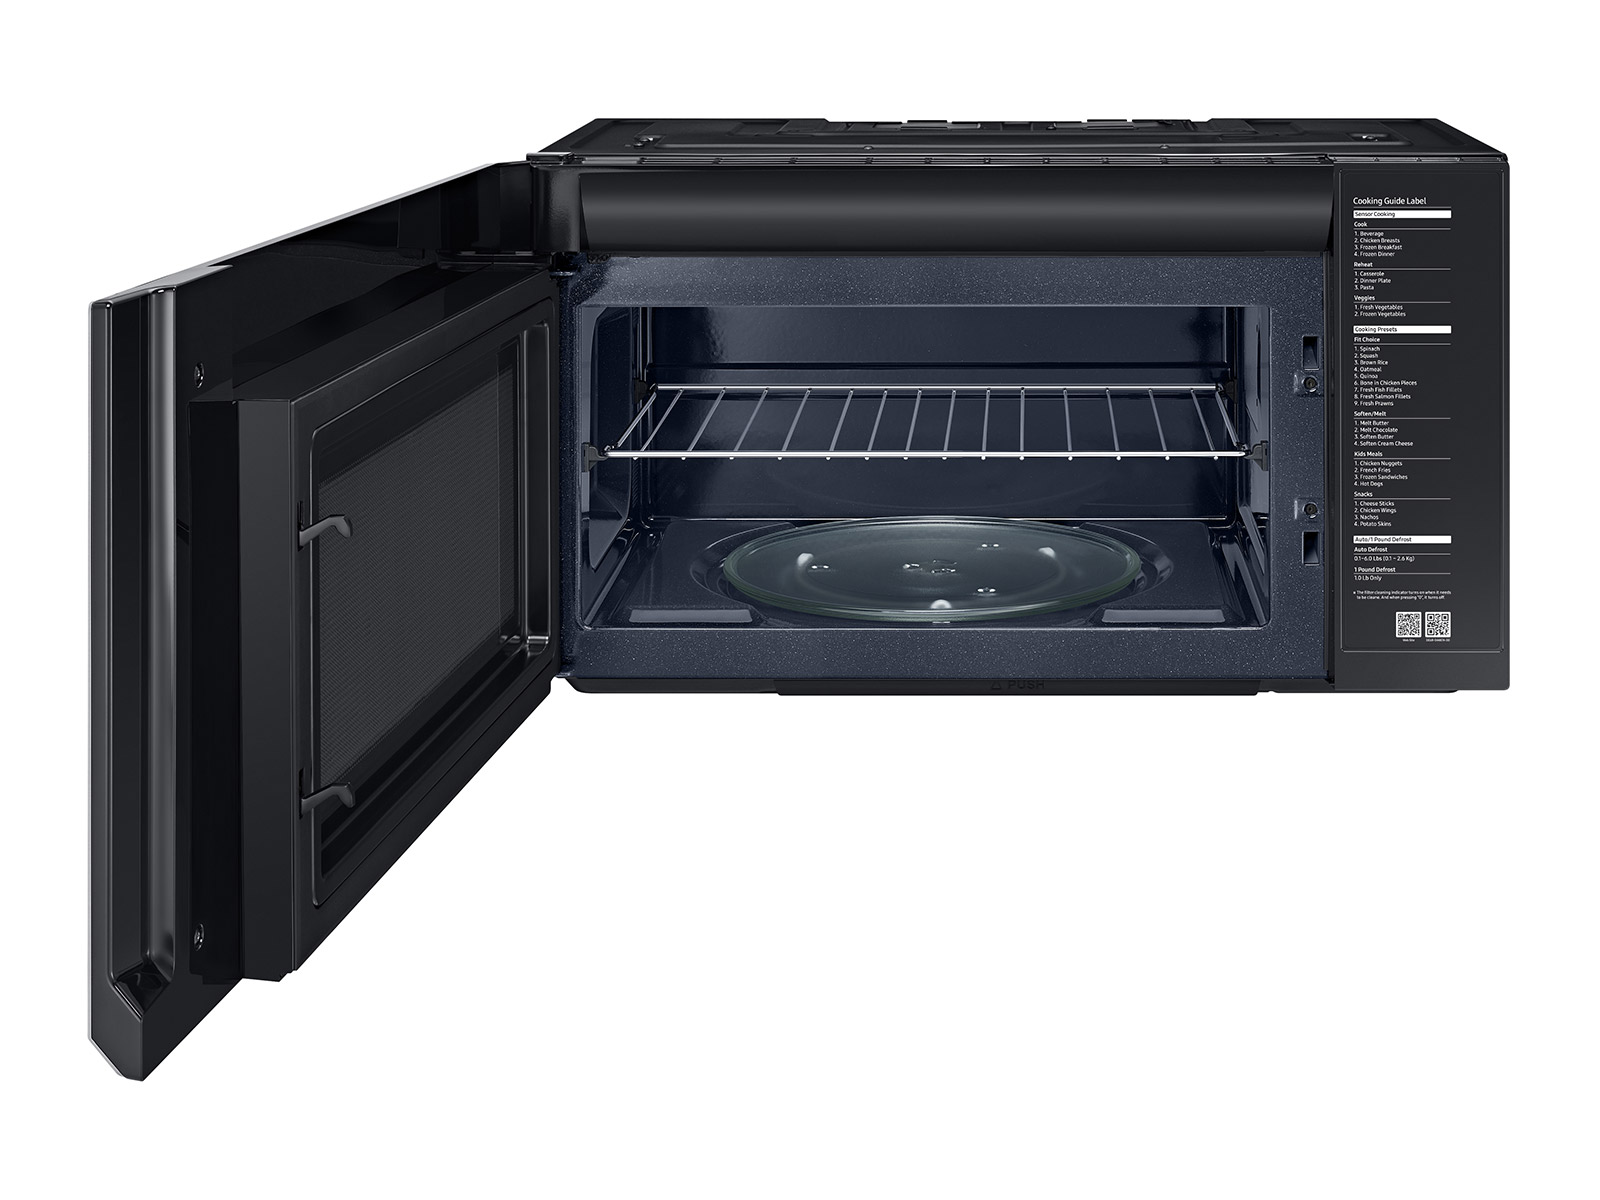 https://image-us.samsung.com/SamsungUS/home/home-appliances/microwaves/over-the-range/pdp/me21m706bas/gallery/02_Microwave_OTR_ME21M706BAS_Front_Open_Rack_Empty_Silver.jpg?$product-details-jpg$